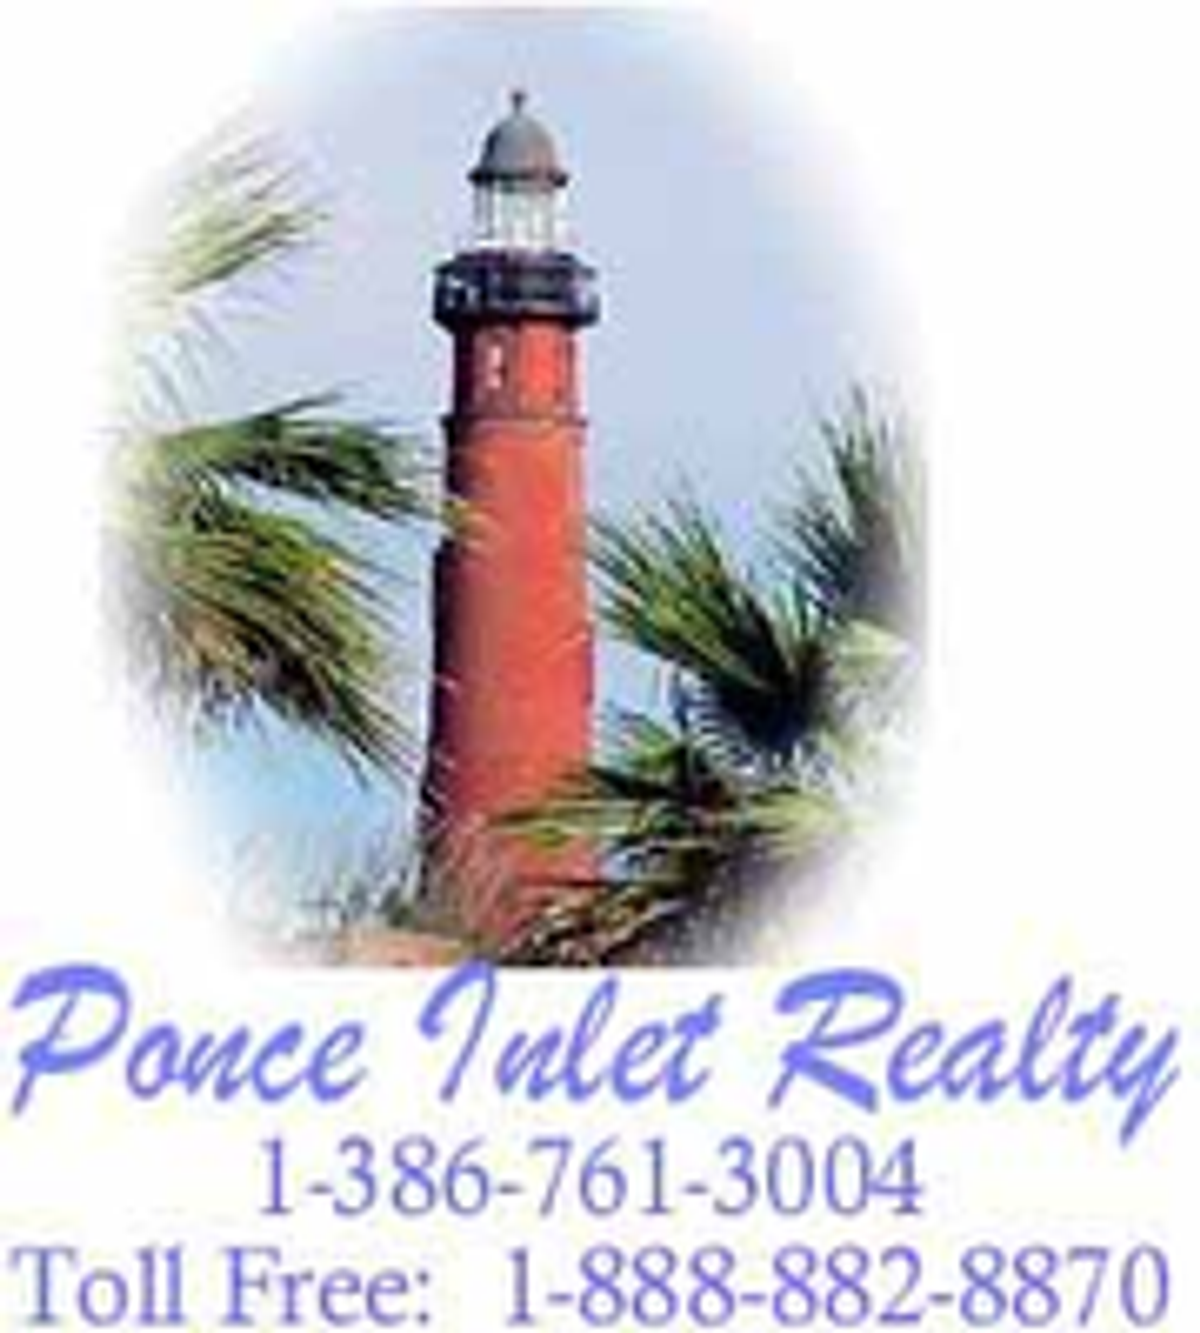 Photo for Ann Crane, Listing Agent at Ponce Inlet Realty, Inc